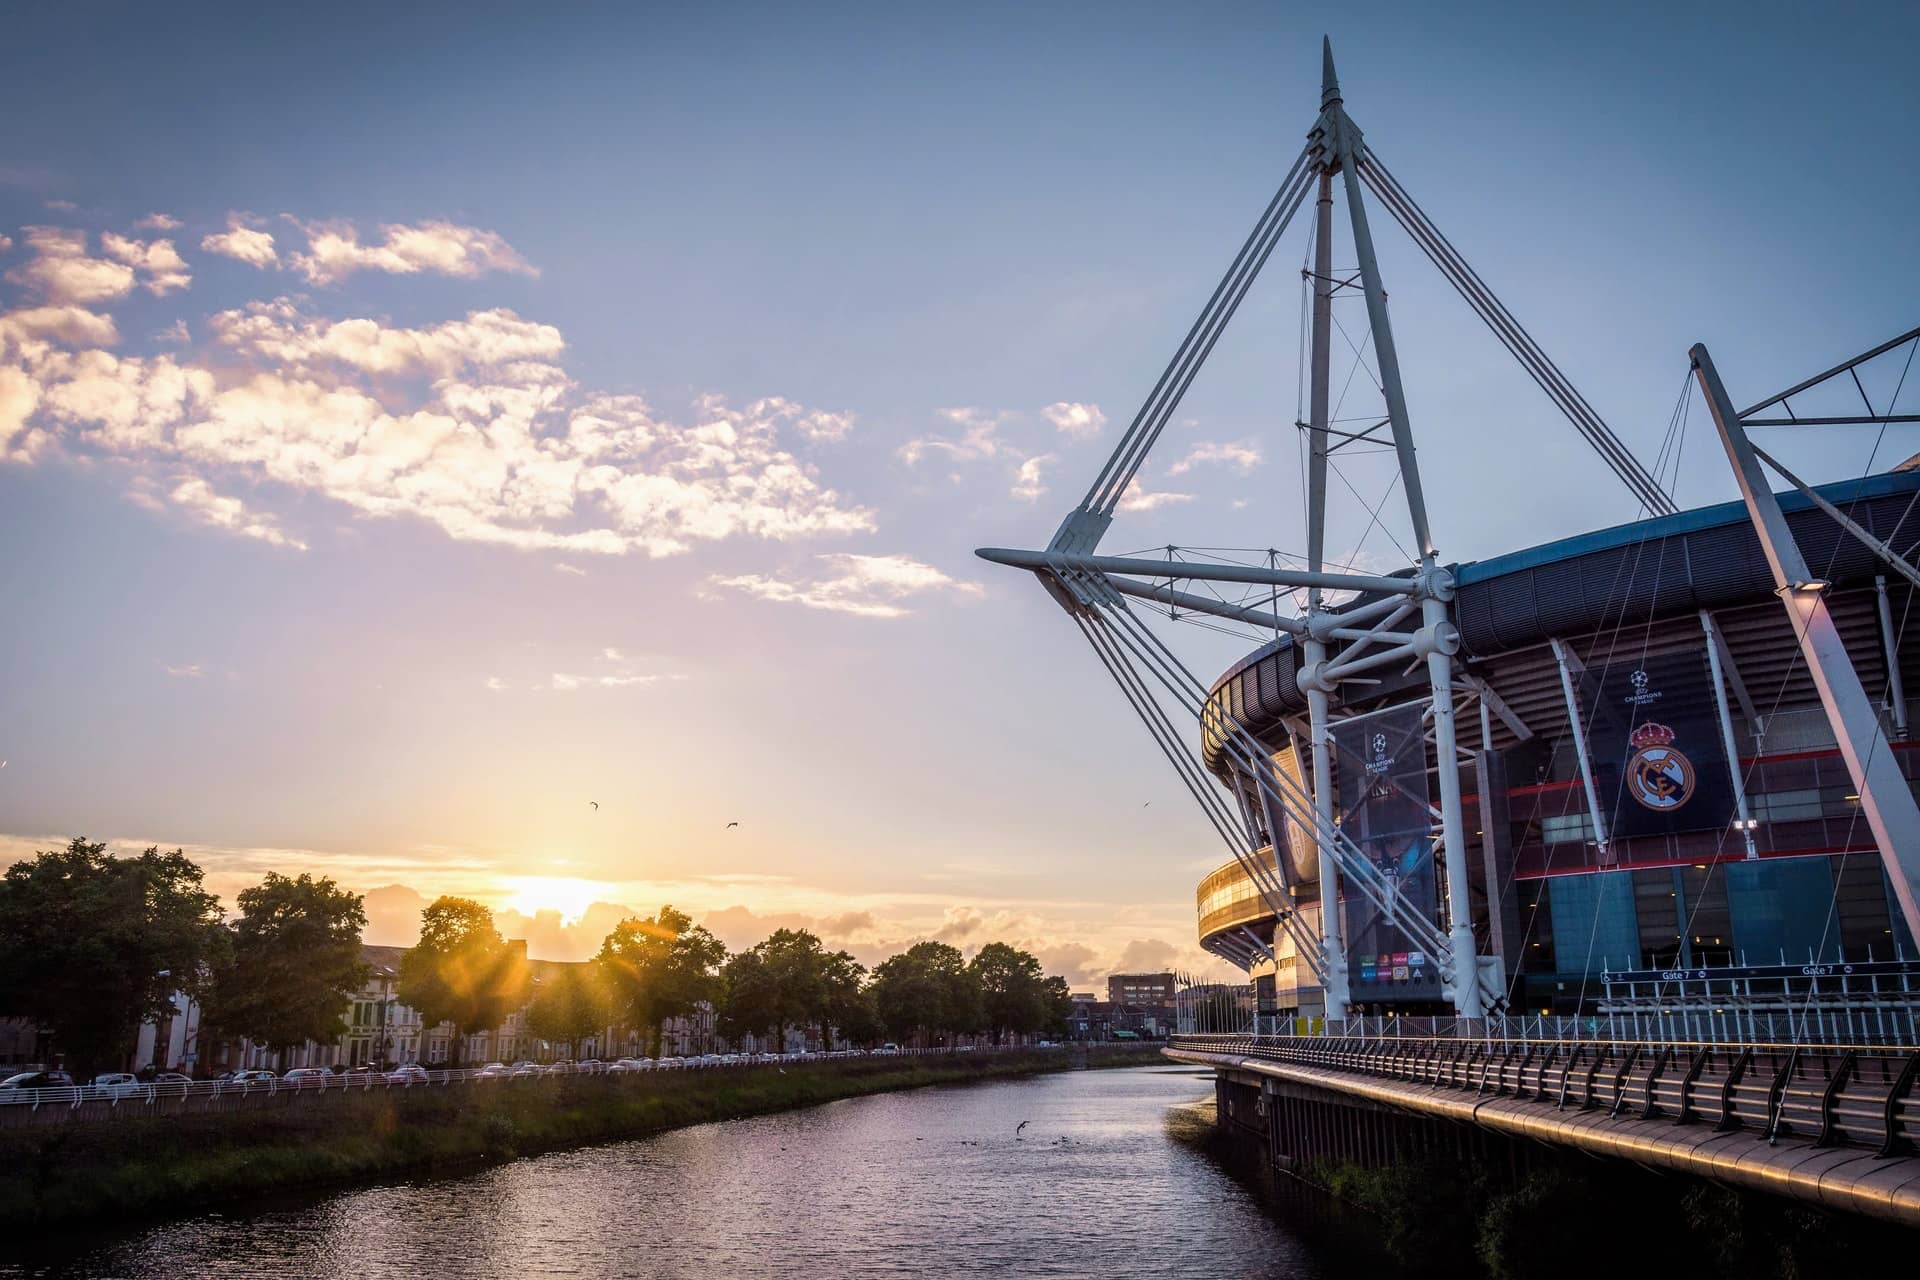 river by the millennium stadium in Cardiff, Wales at sunset 